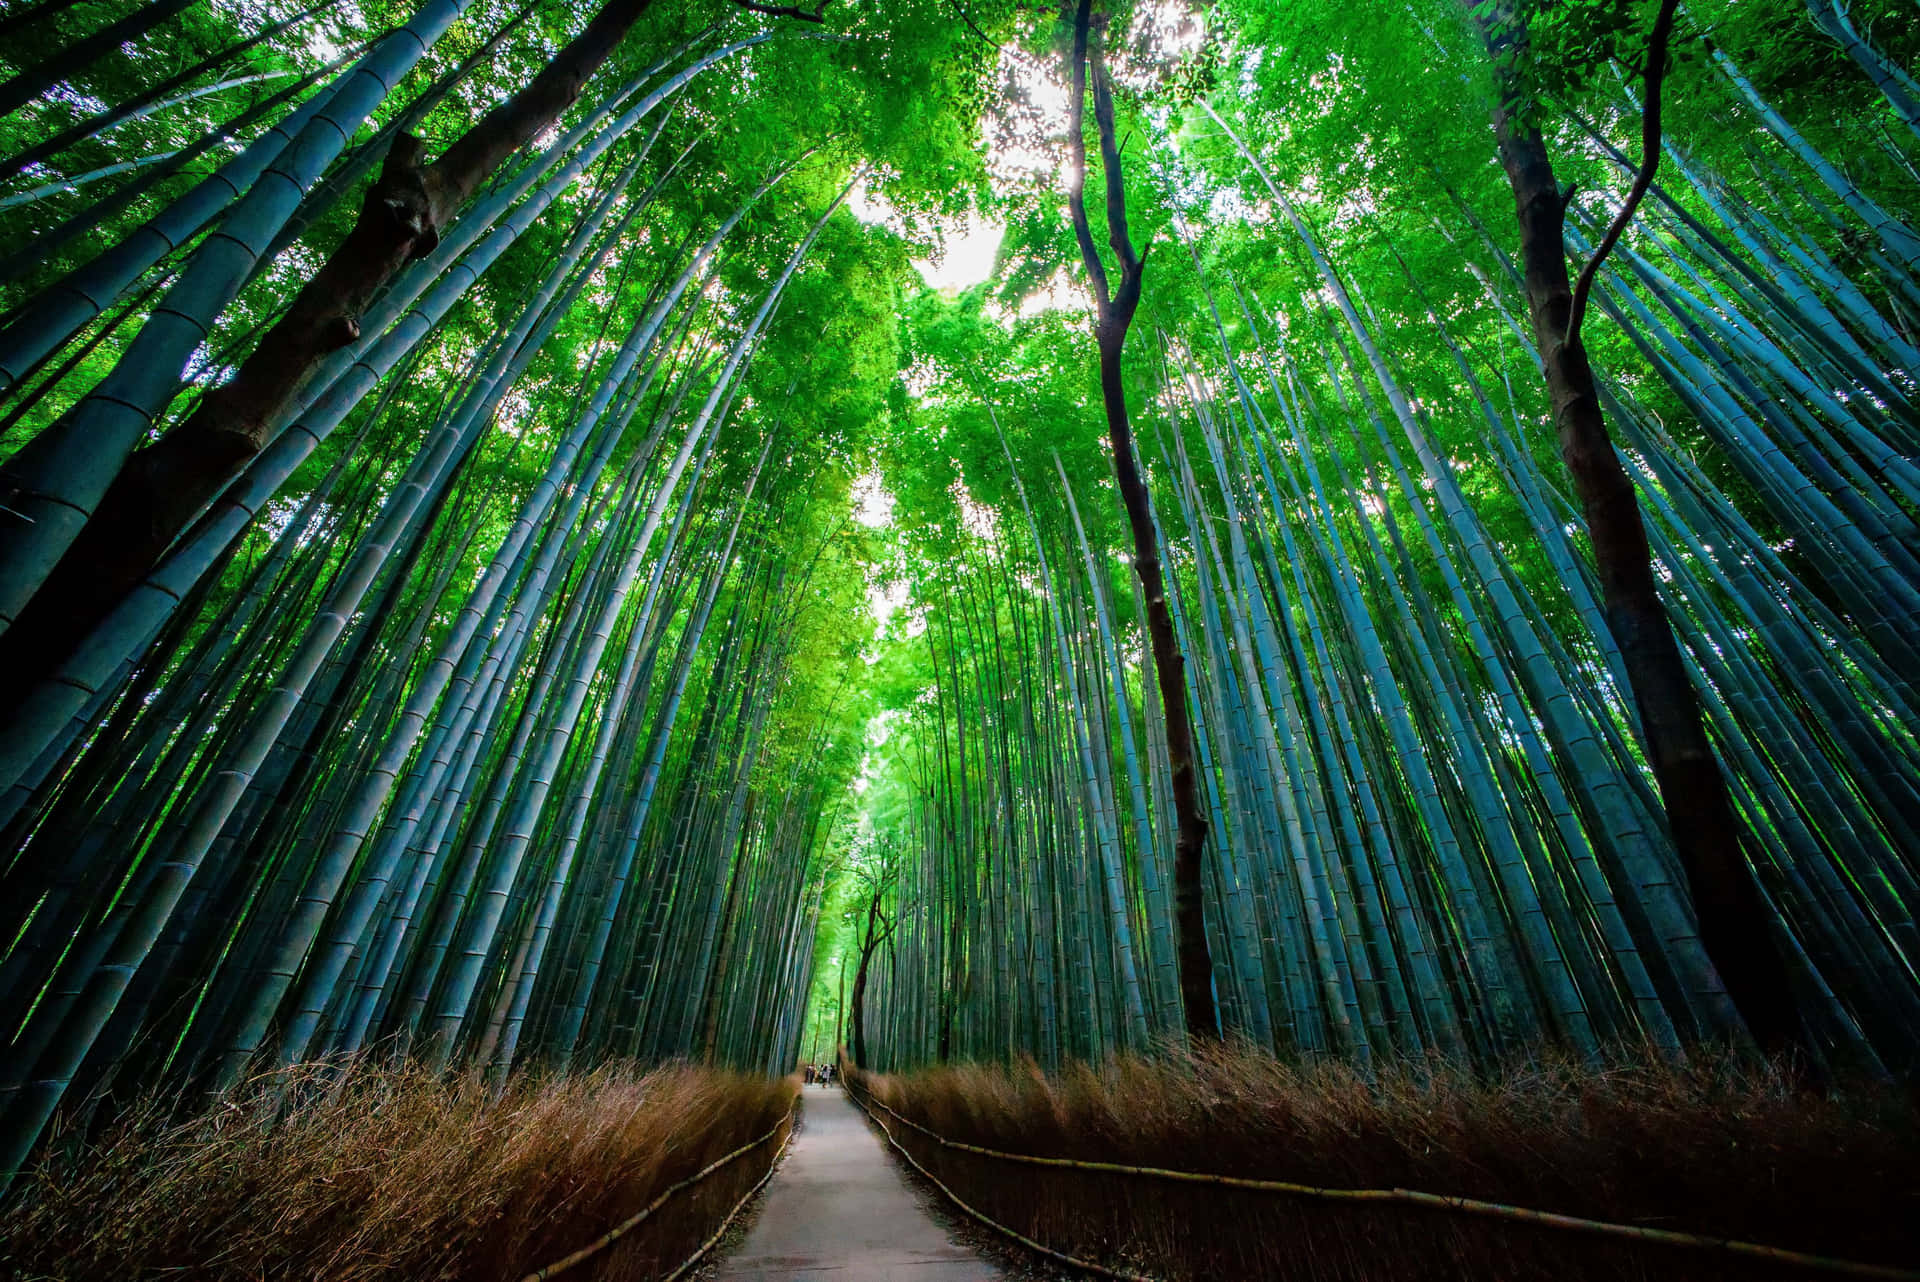 Bamboo Forest In Kyoto, Japan Wallpaper